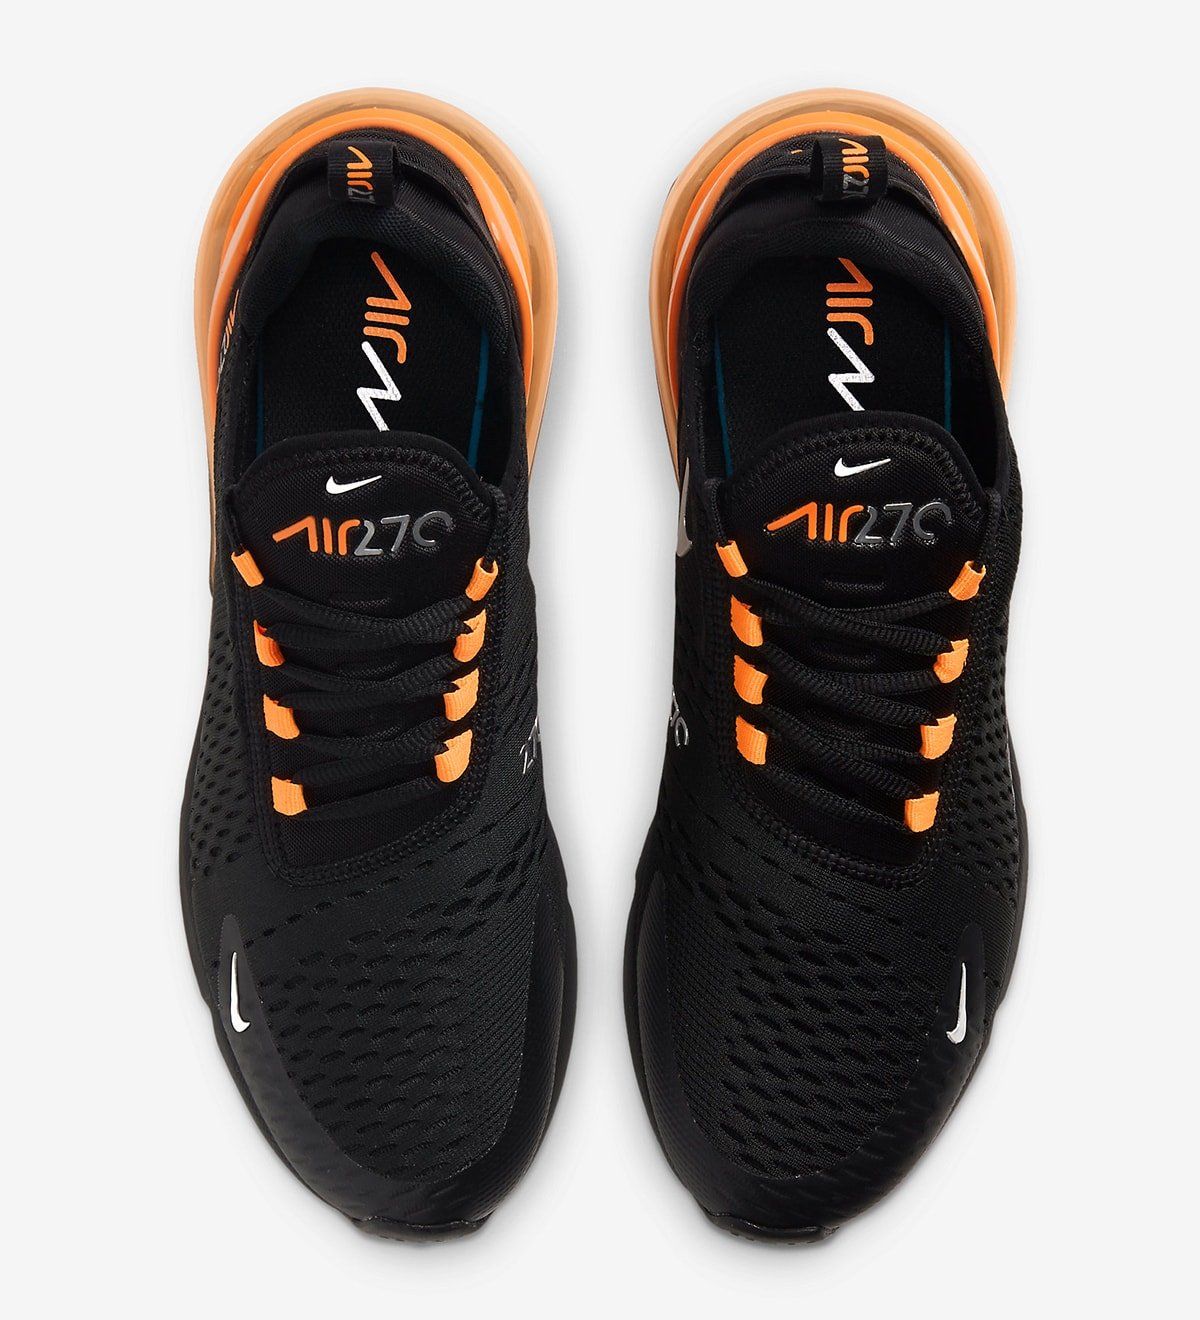 Flashy visitor beast Available Now // The Nike Air Max 270 Returns for Halloween in Black &  Orange | HOUSE OF HEAT